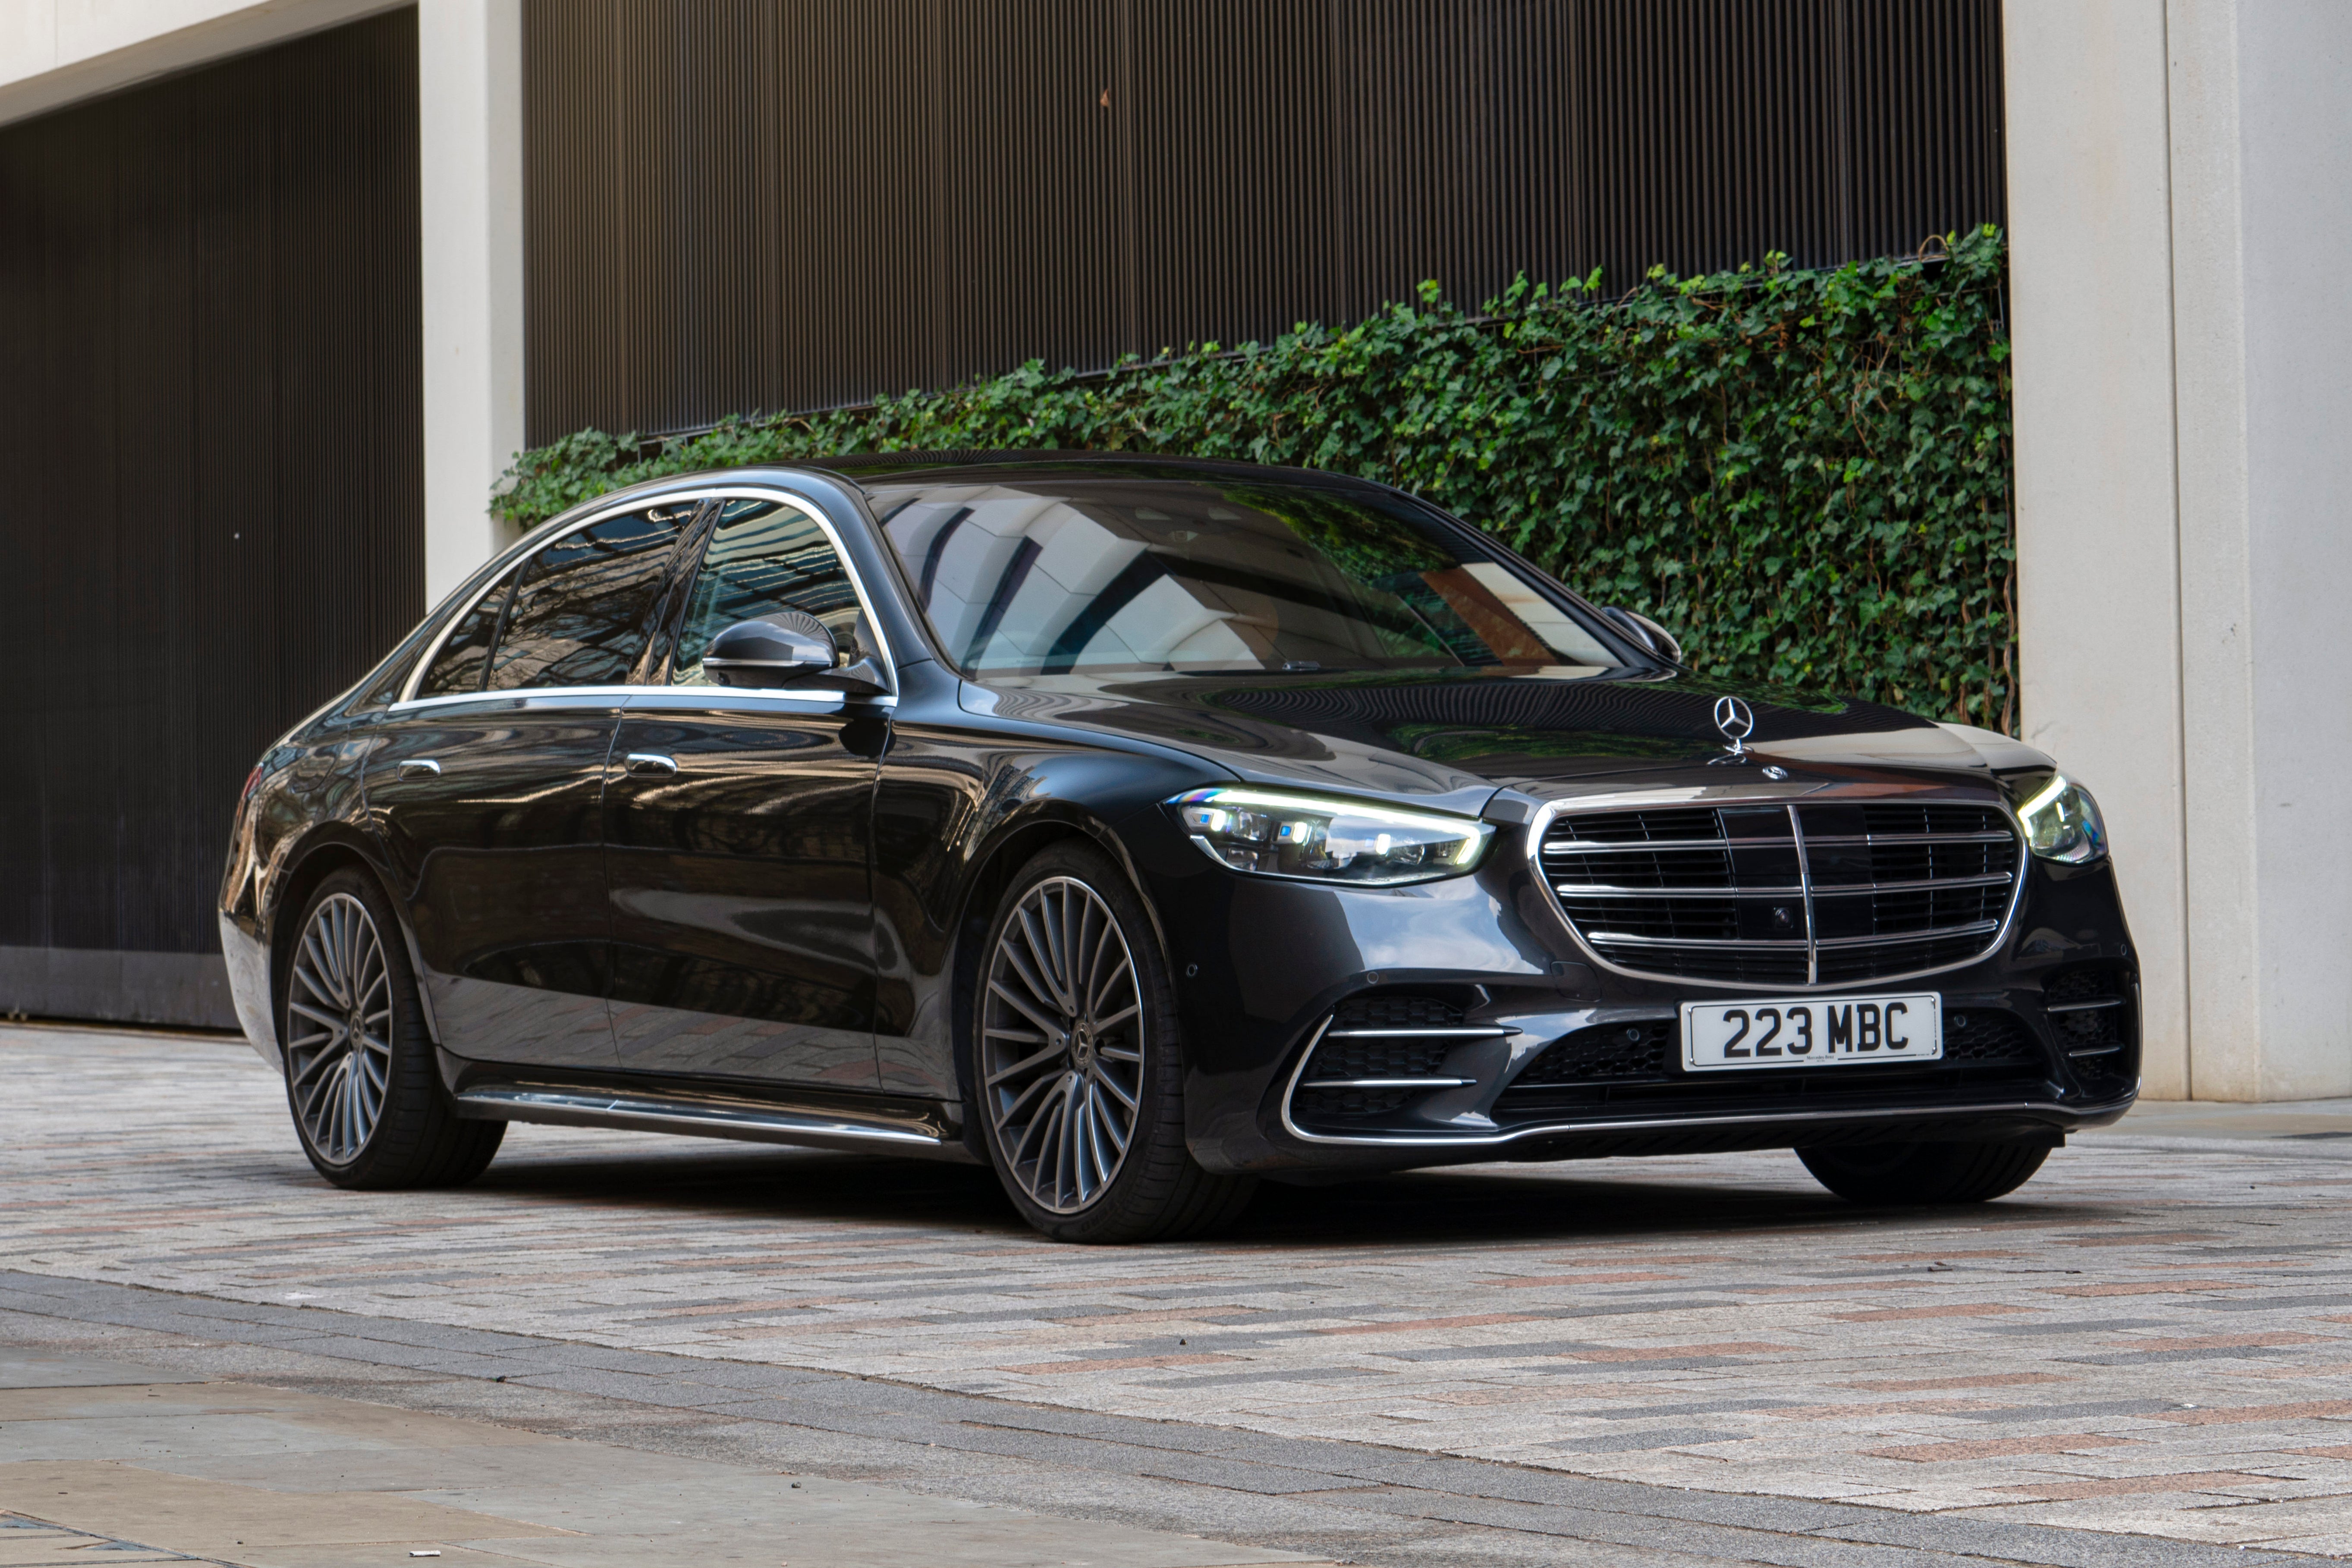 Abnormal Situation salvage Mercedes-Benz S-Class Review 2022 | heycar